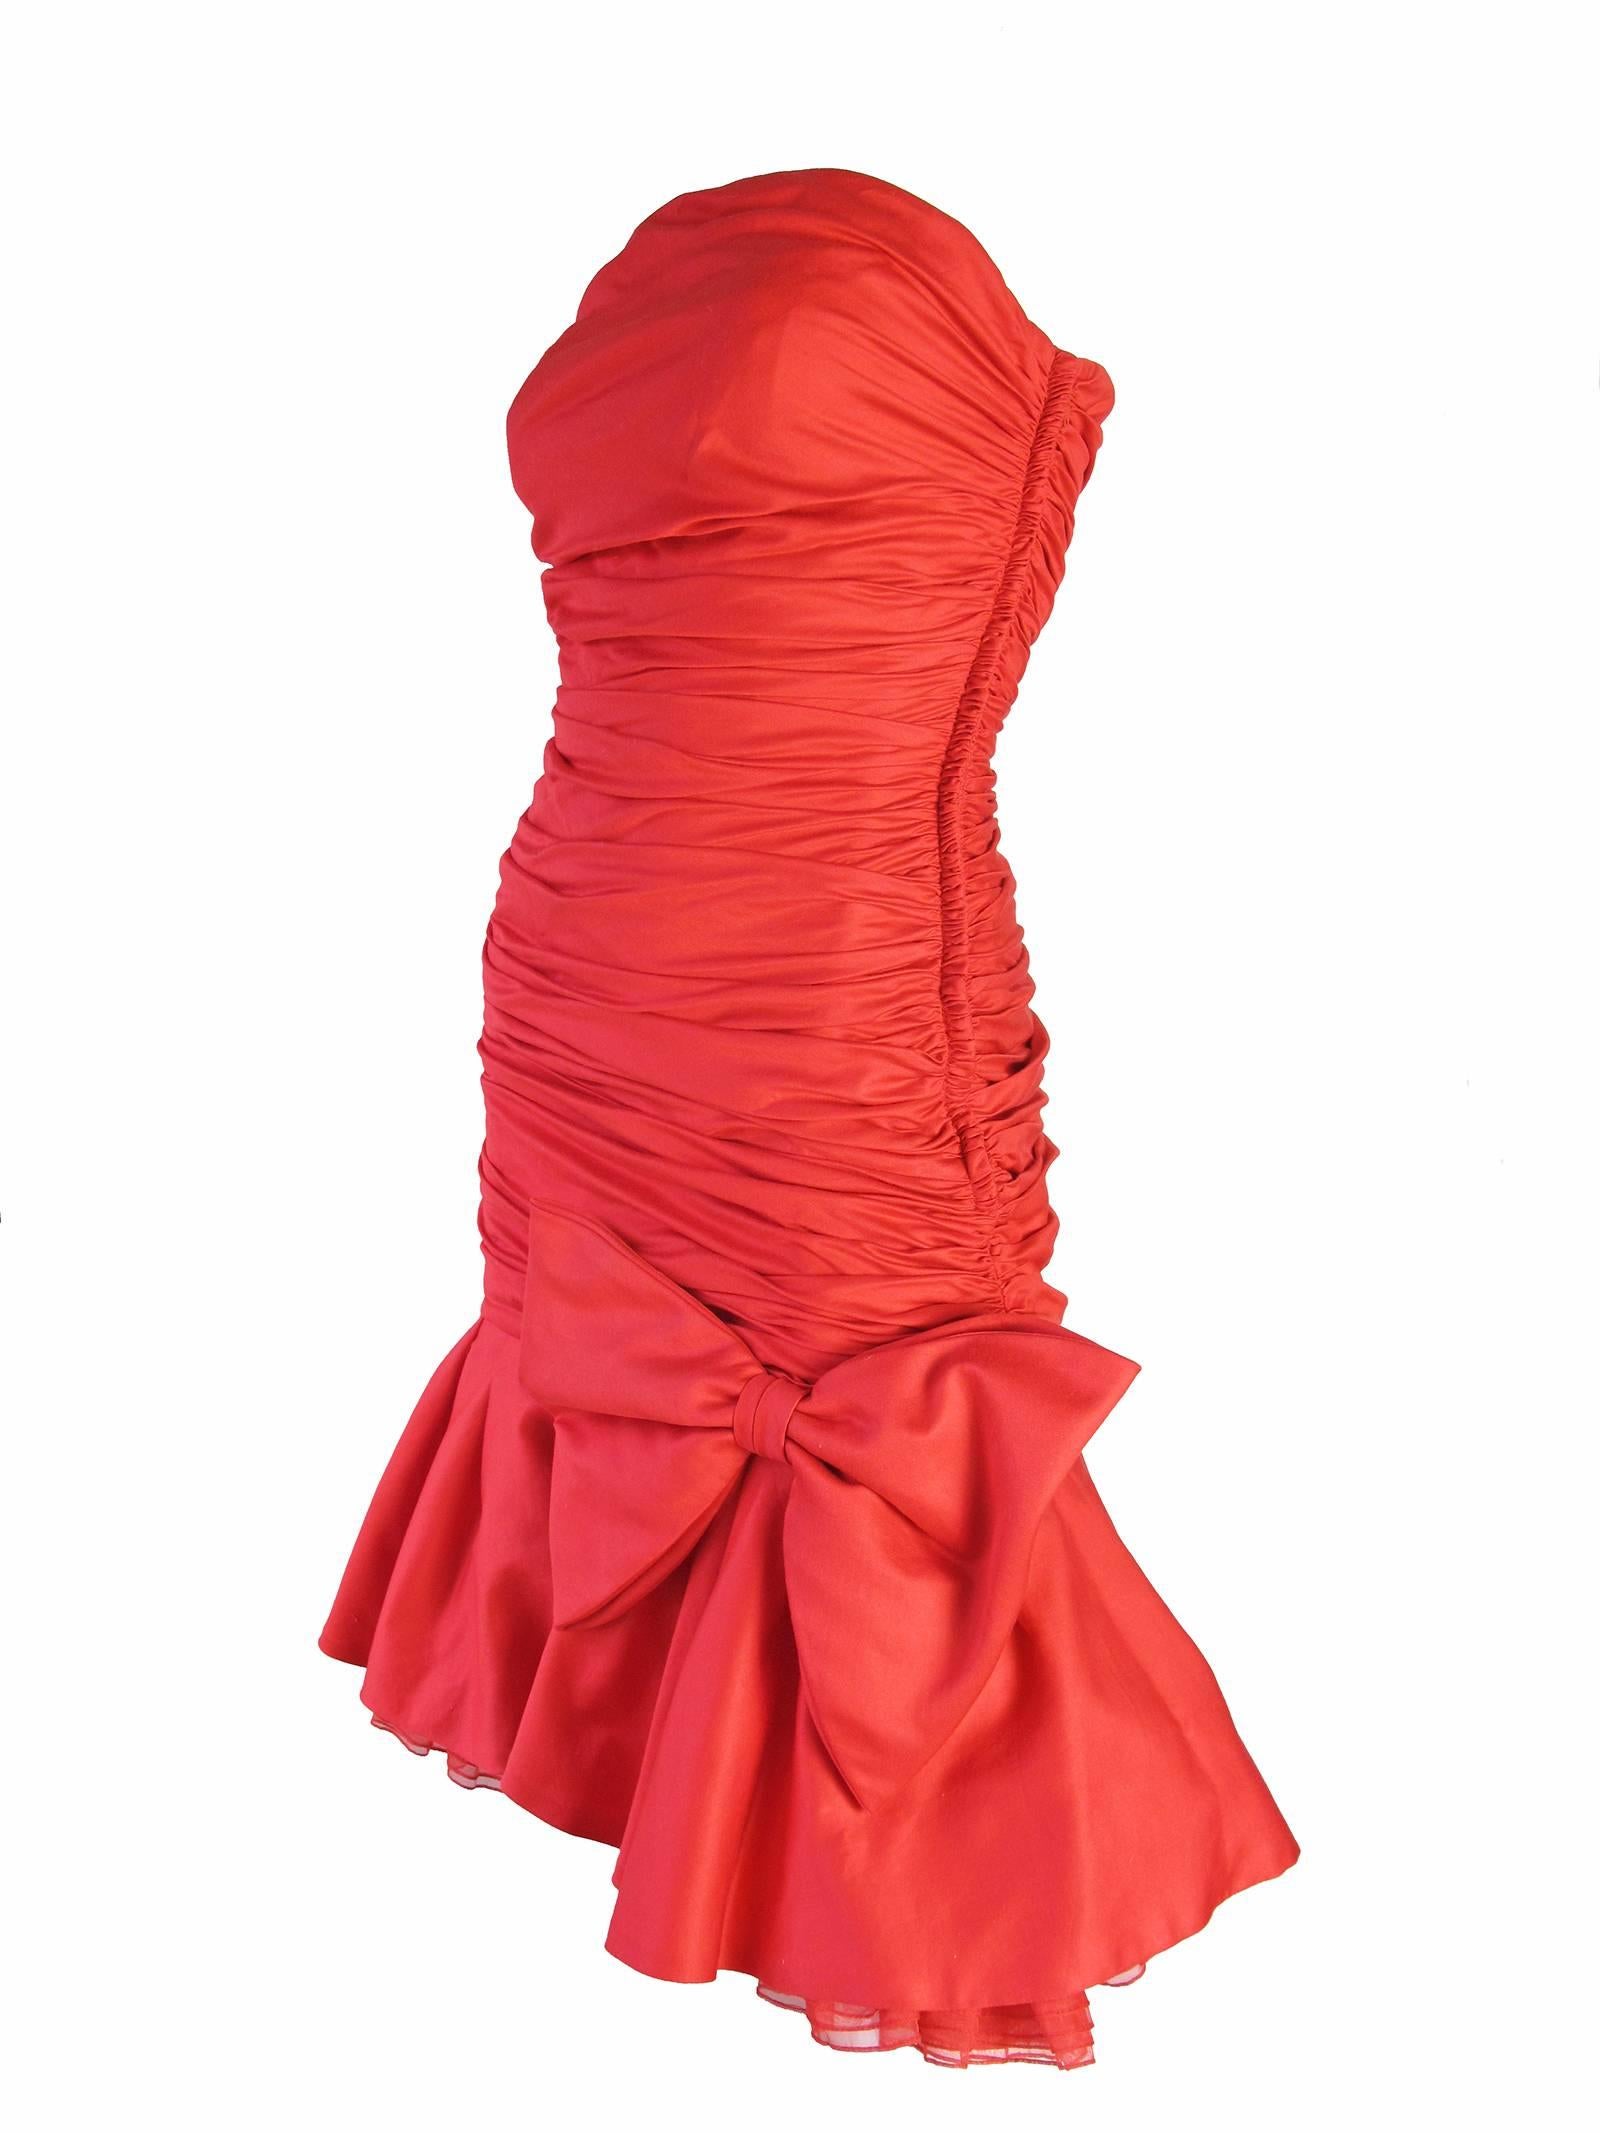 1980s Christian Dior strapless red dress with ruffle and bow.  Cotton fabric. Zipper up side and boning inside down front..  Condition; Excellent. Size 4/6

We accept returns for refund, please see our terms.  We offer free ground shipping within